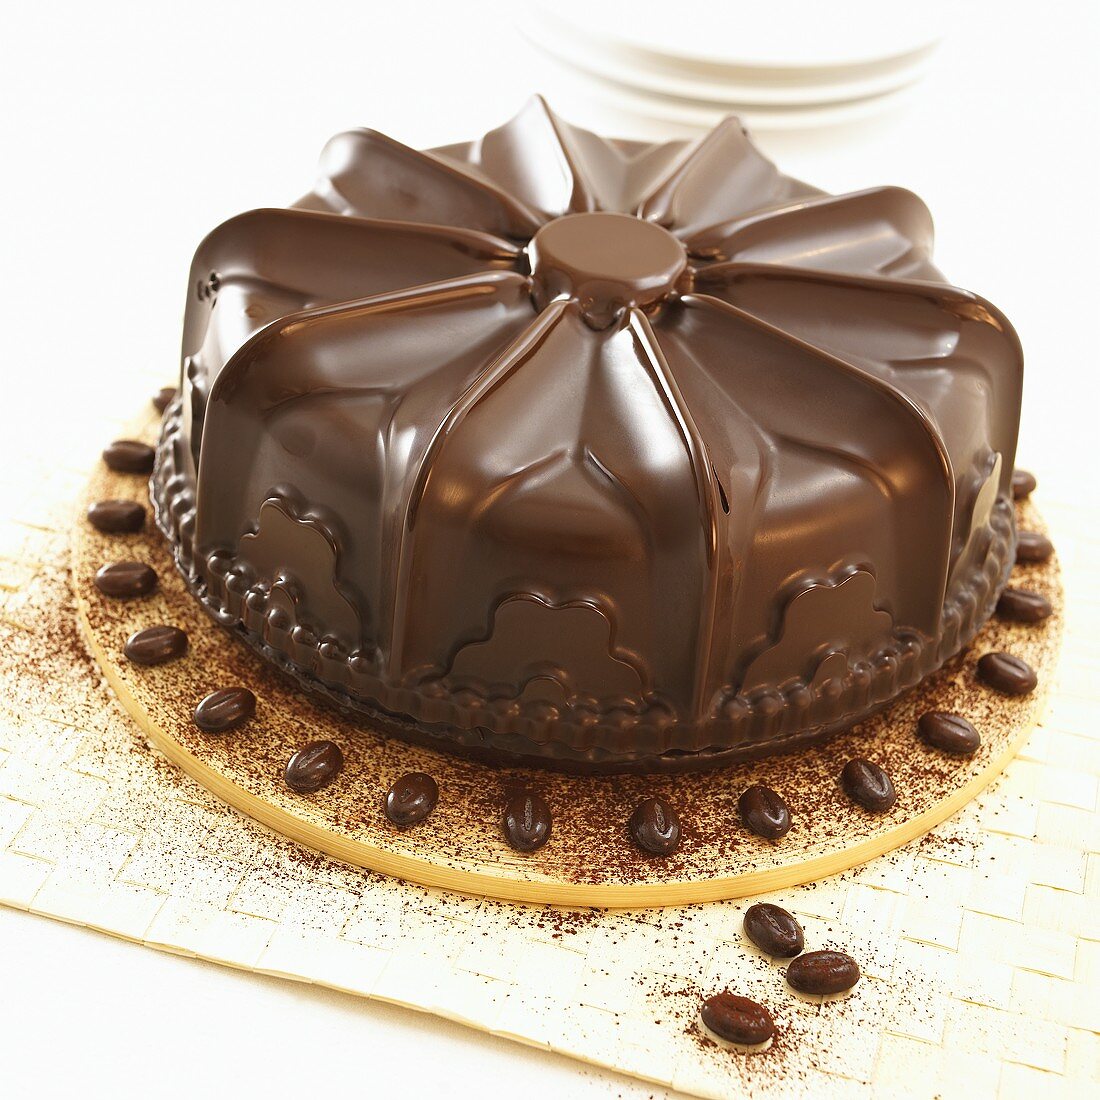 Chocolate cake for special occasion